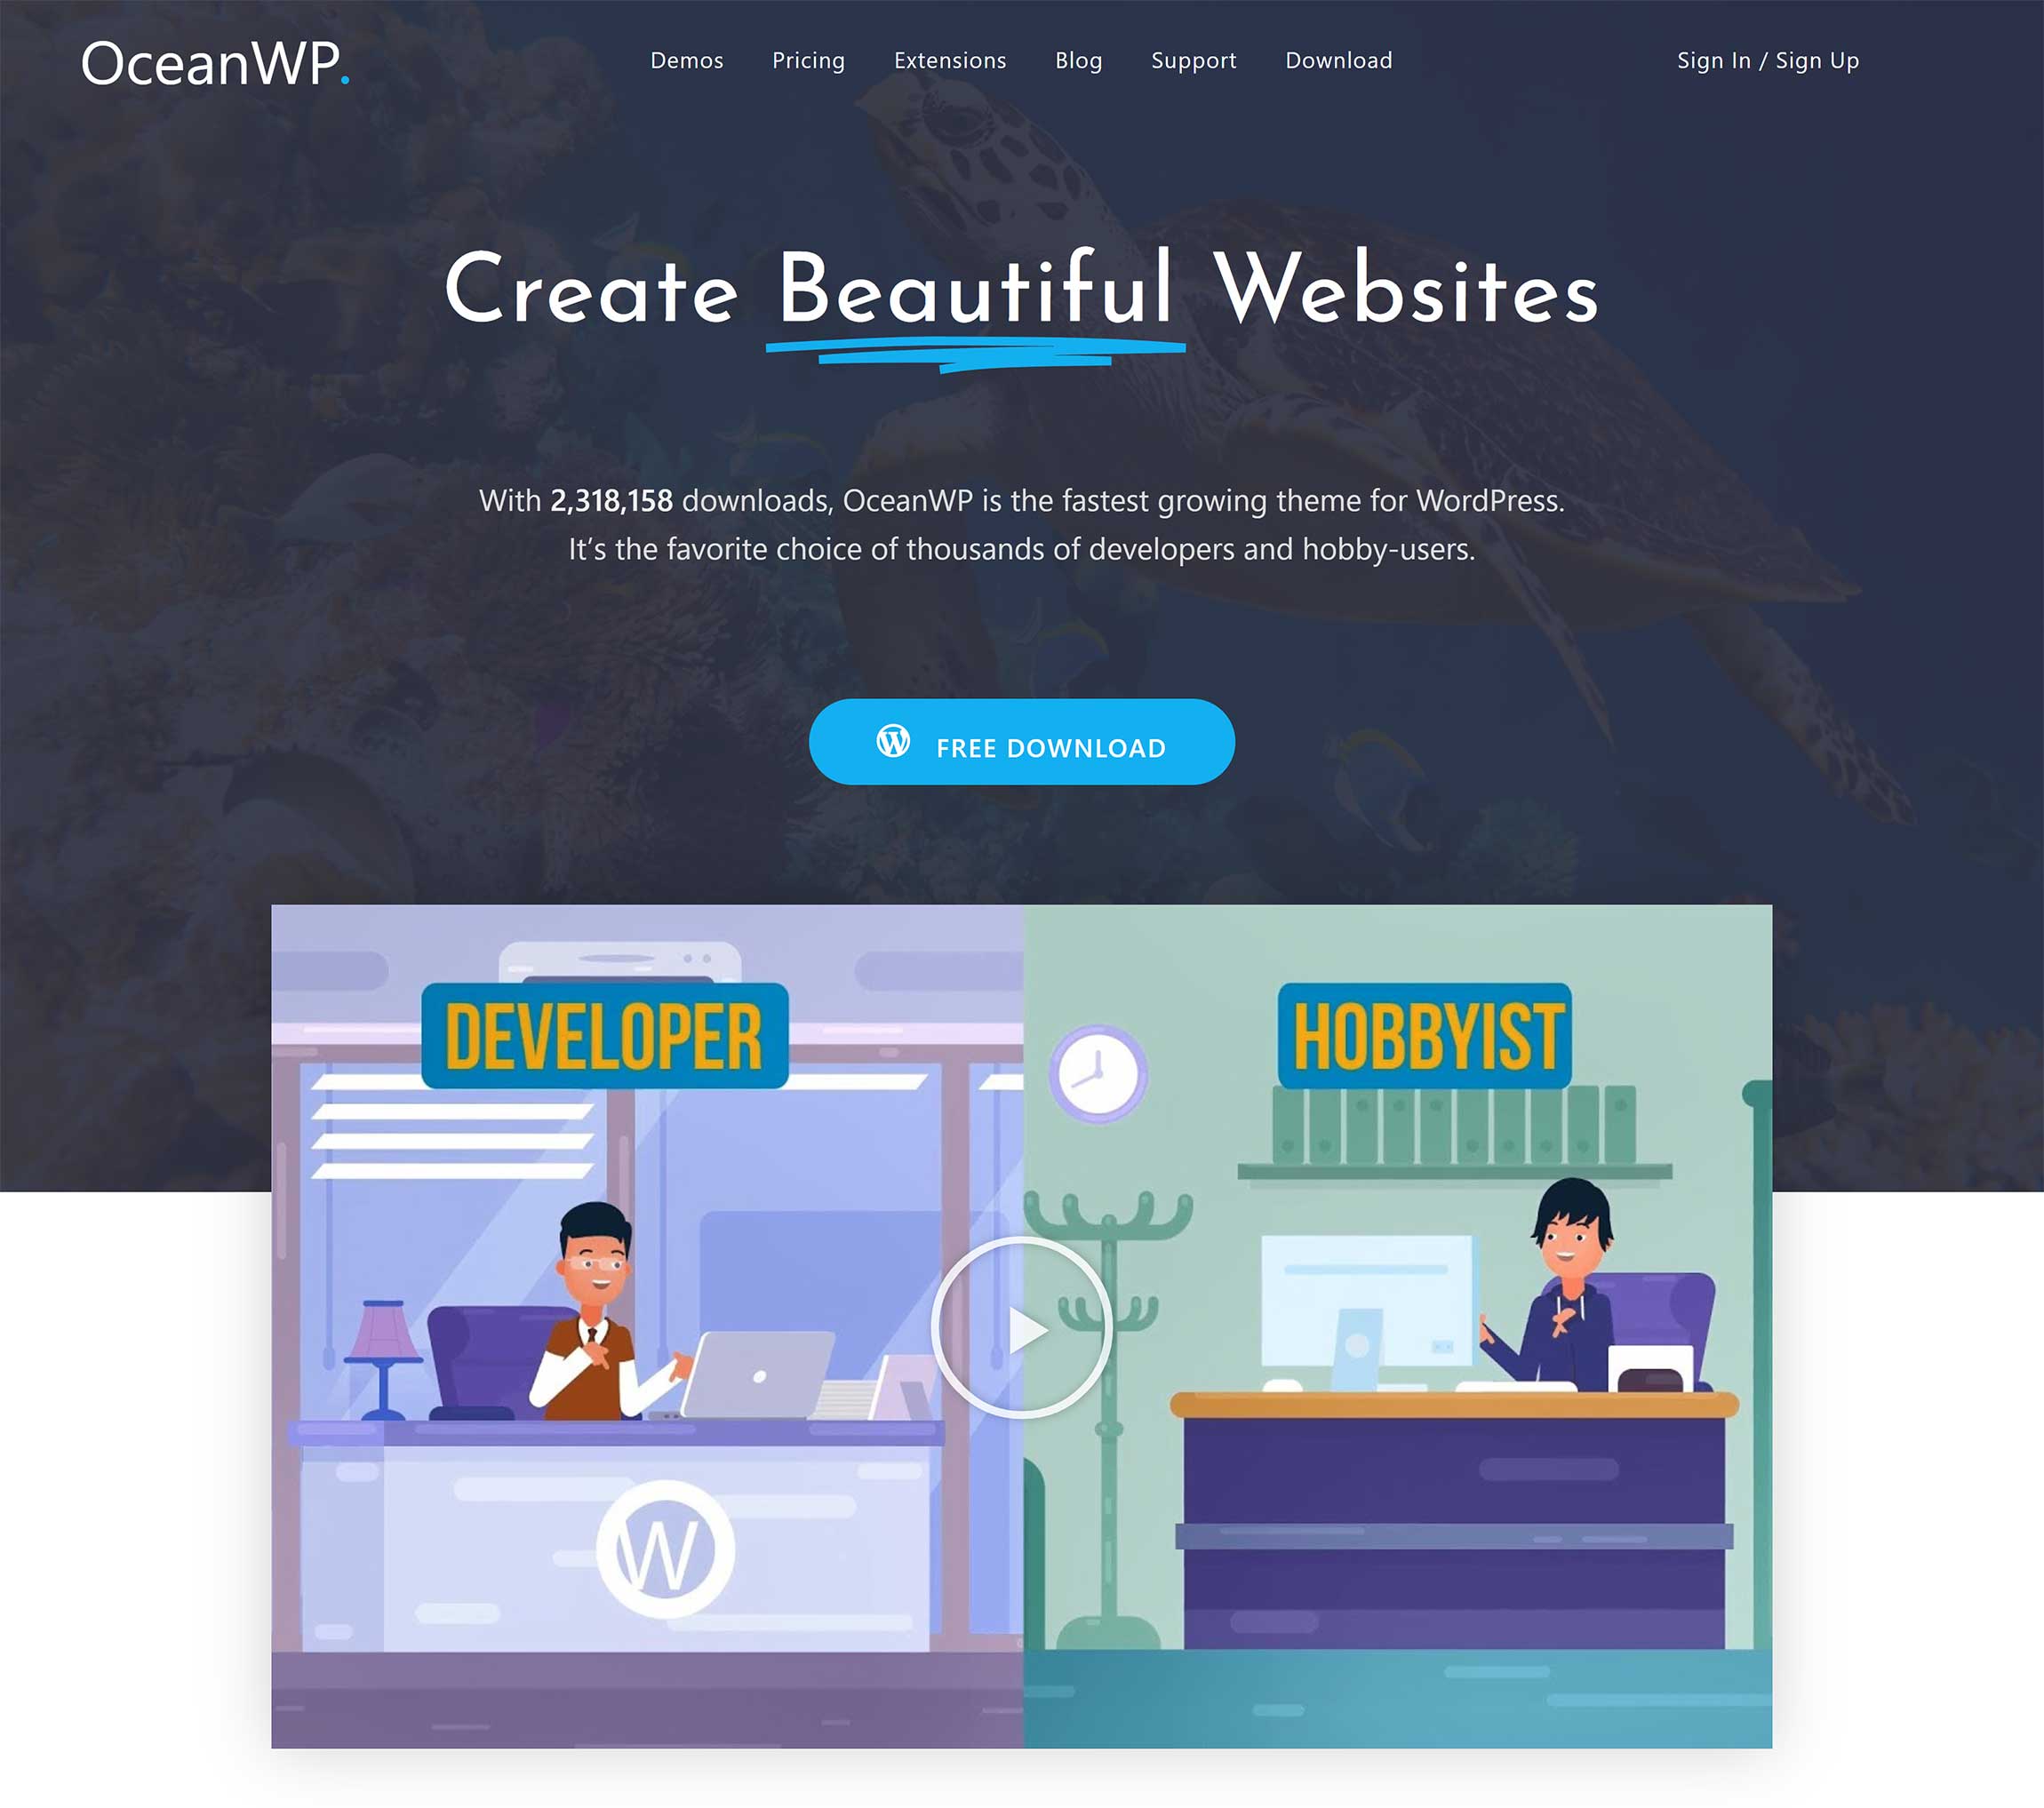 OceanWP Home Page